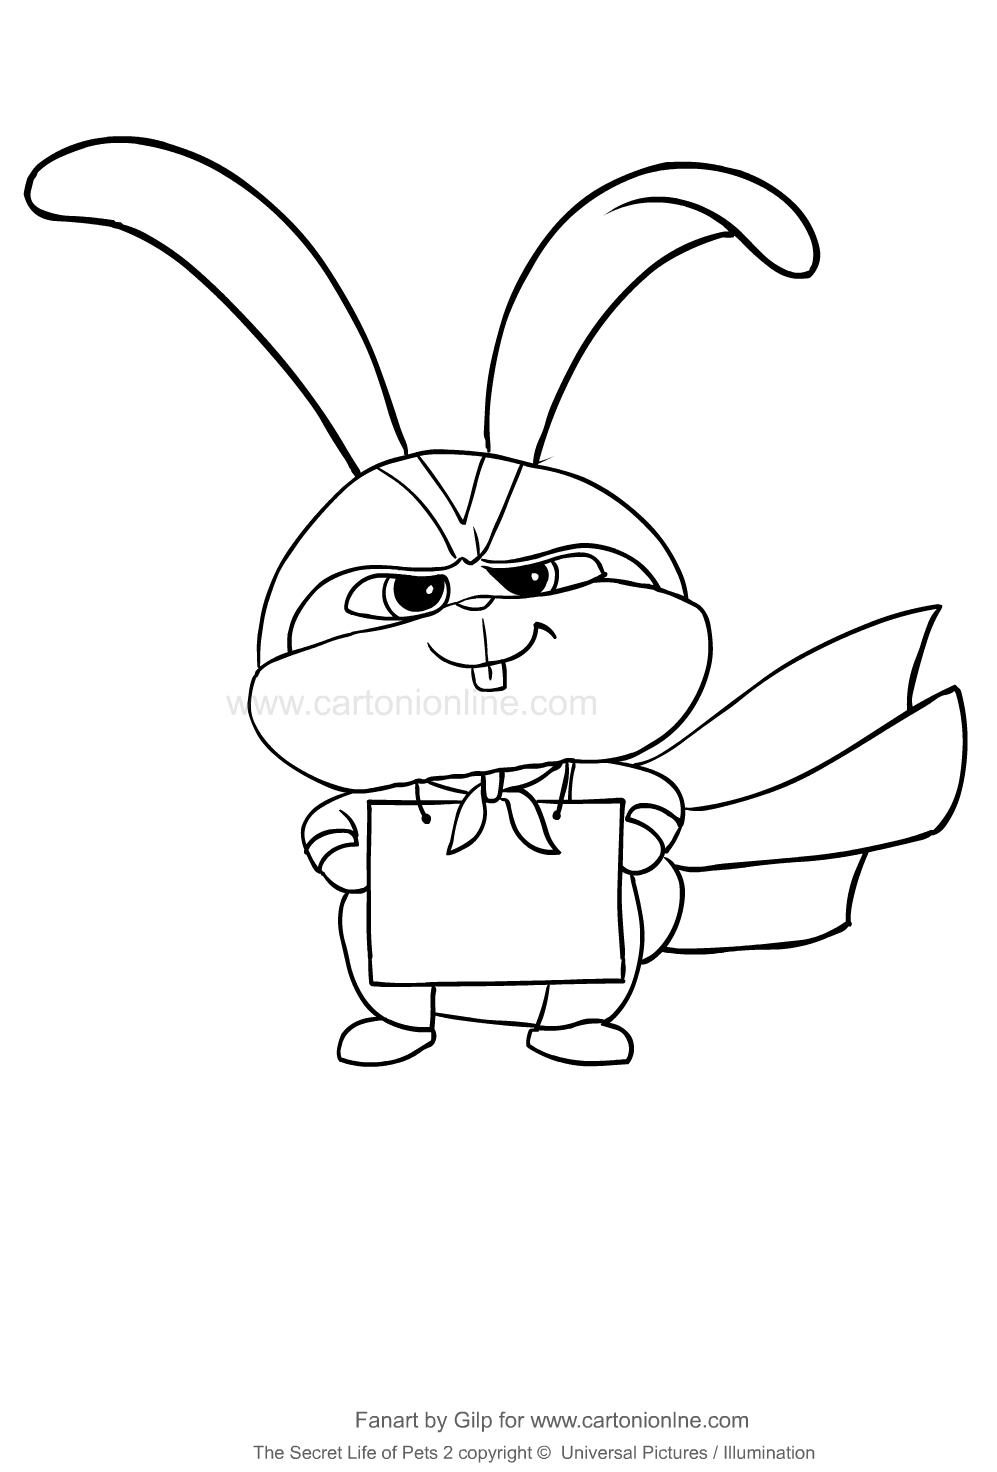 Snowball from The Secret Life of Pets 2 coloring page to print and coloring